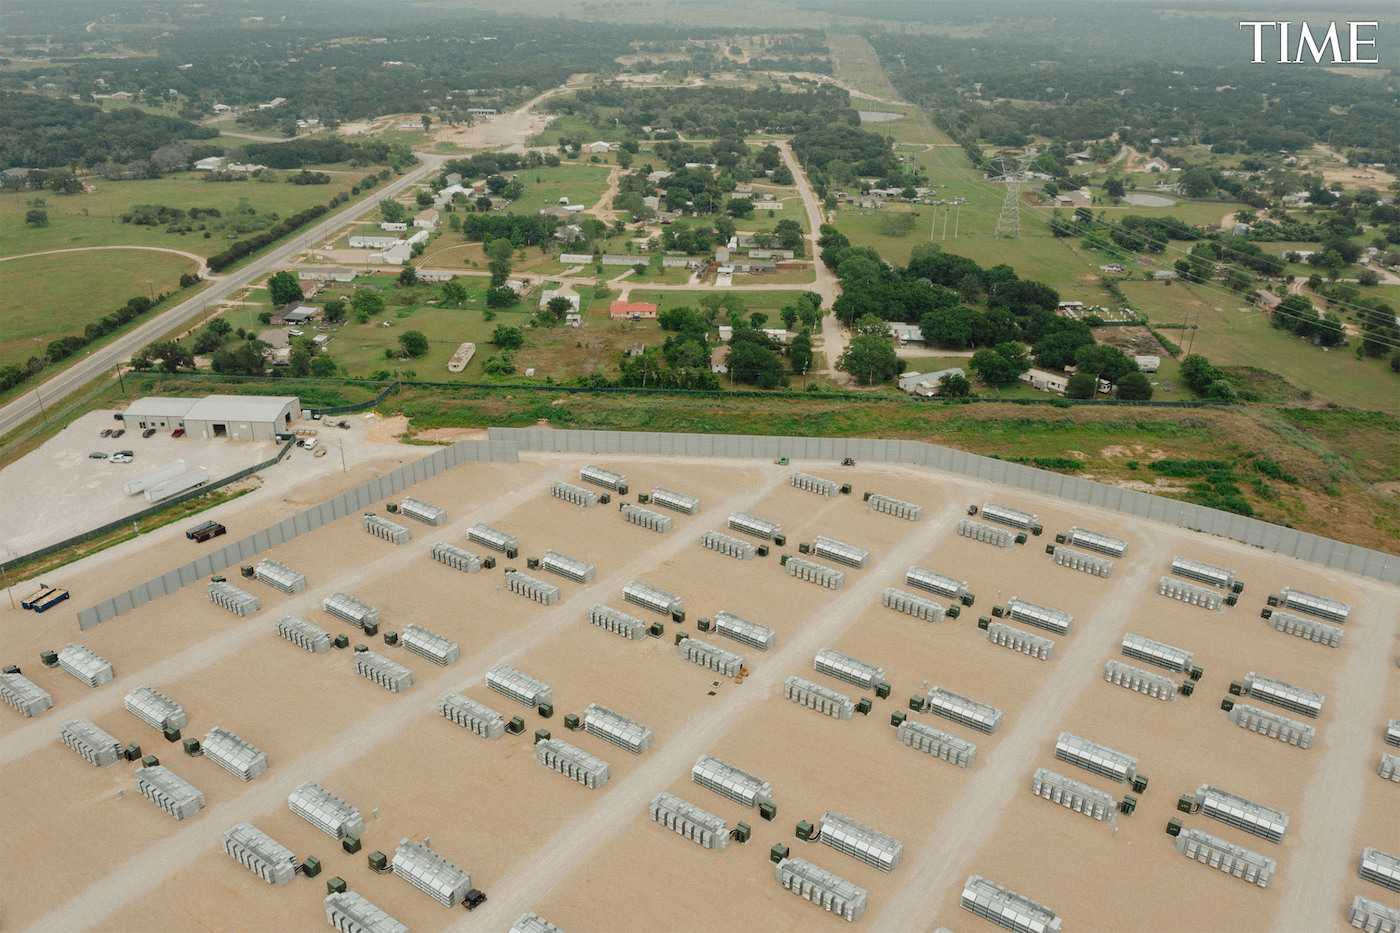 An aerial view of a group of buildings next to a residential area.